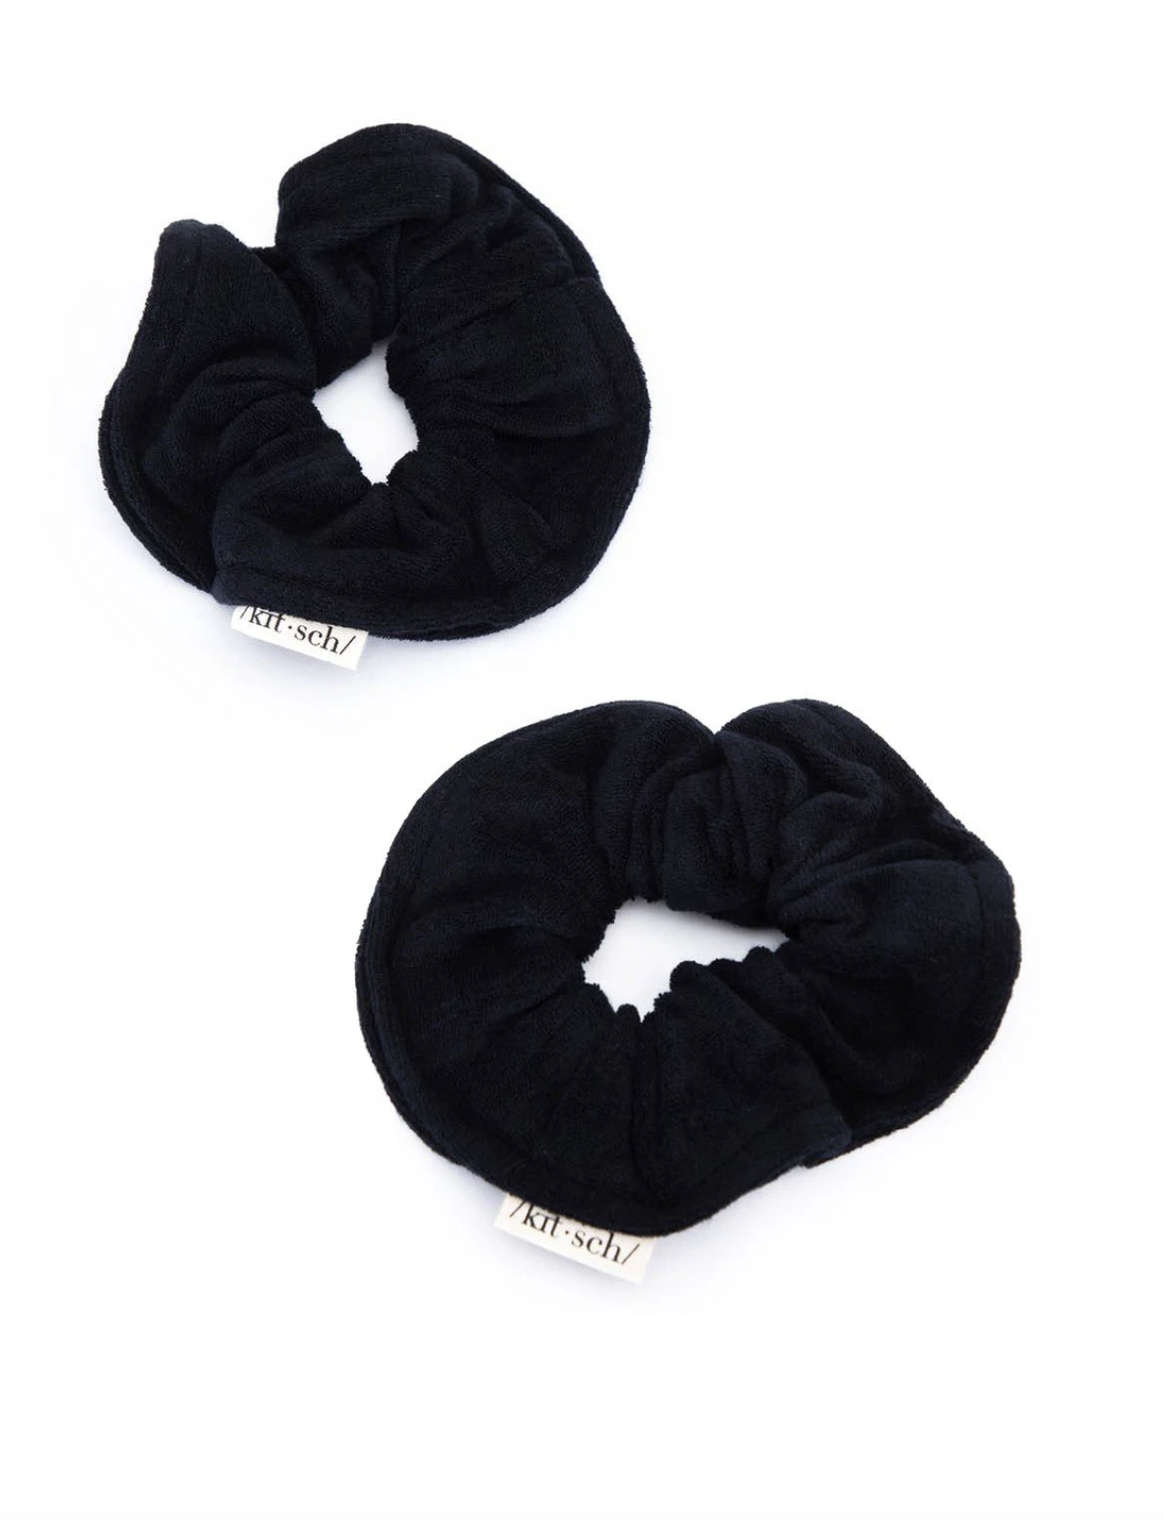 Towel Scrunchie Gifts